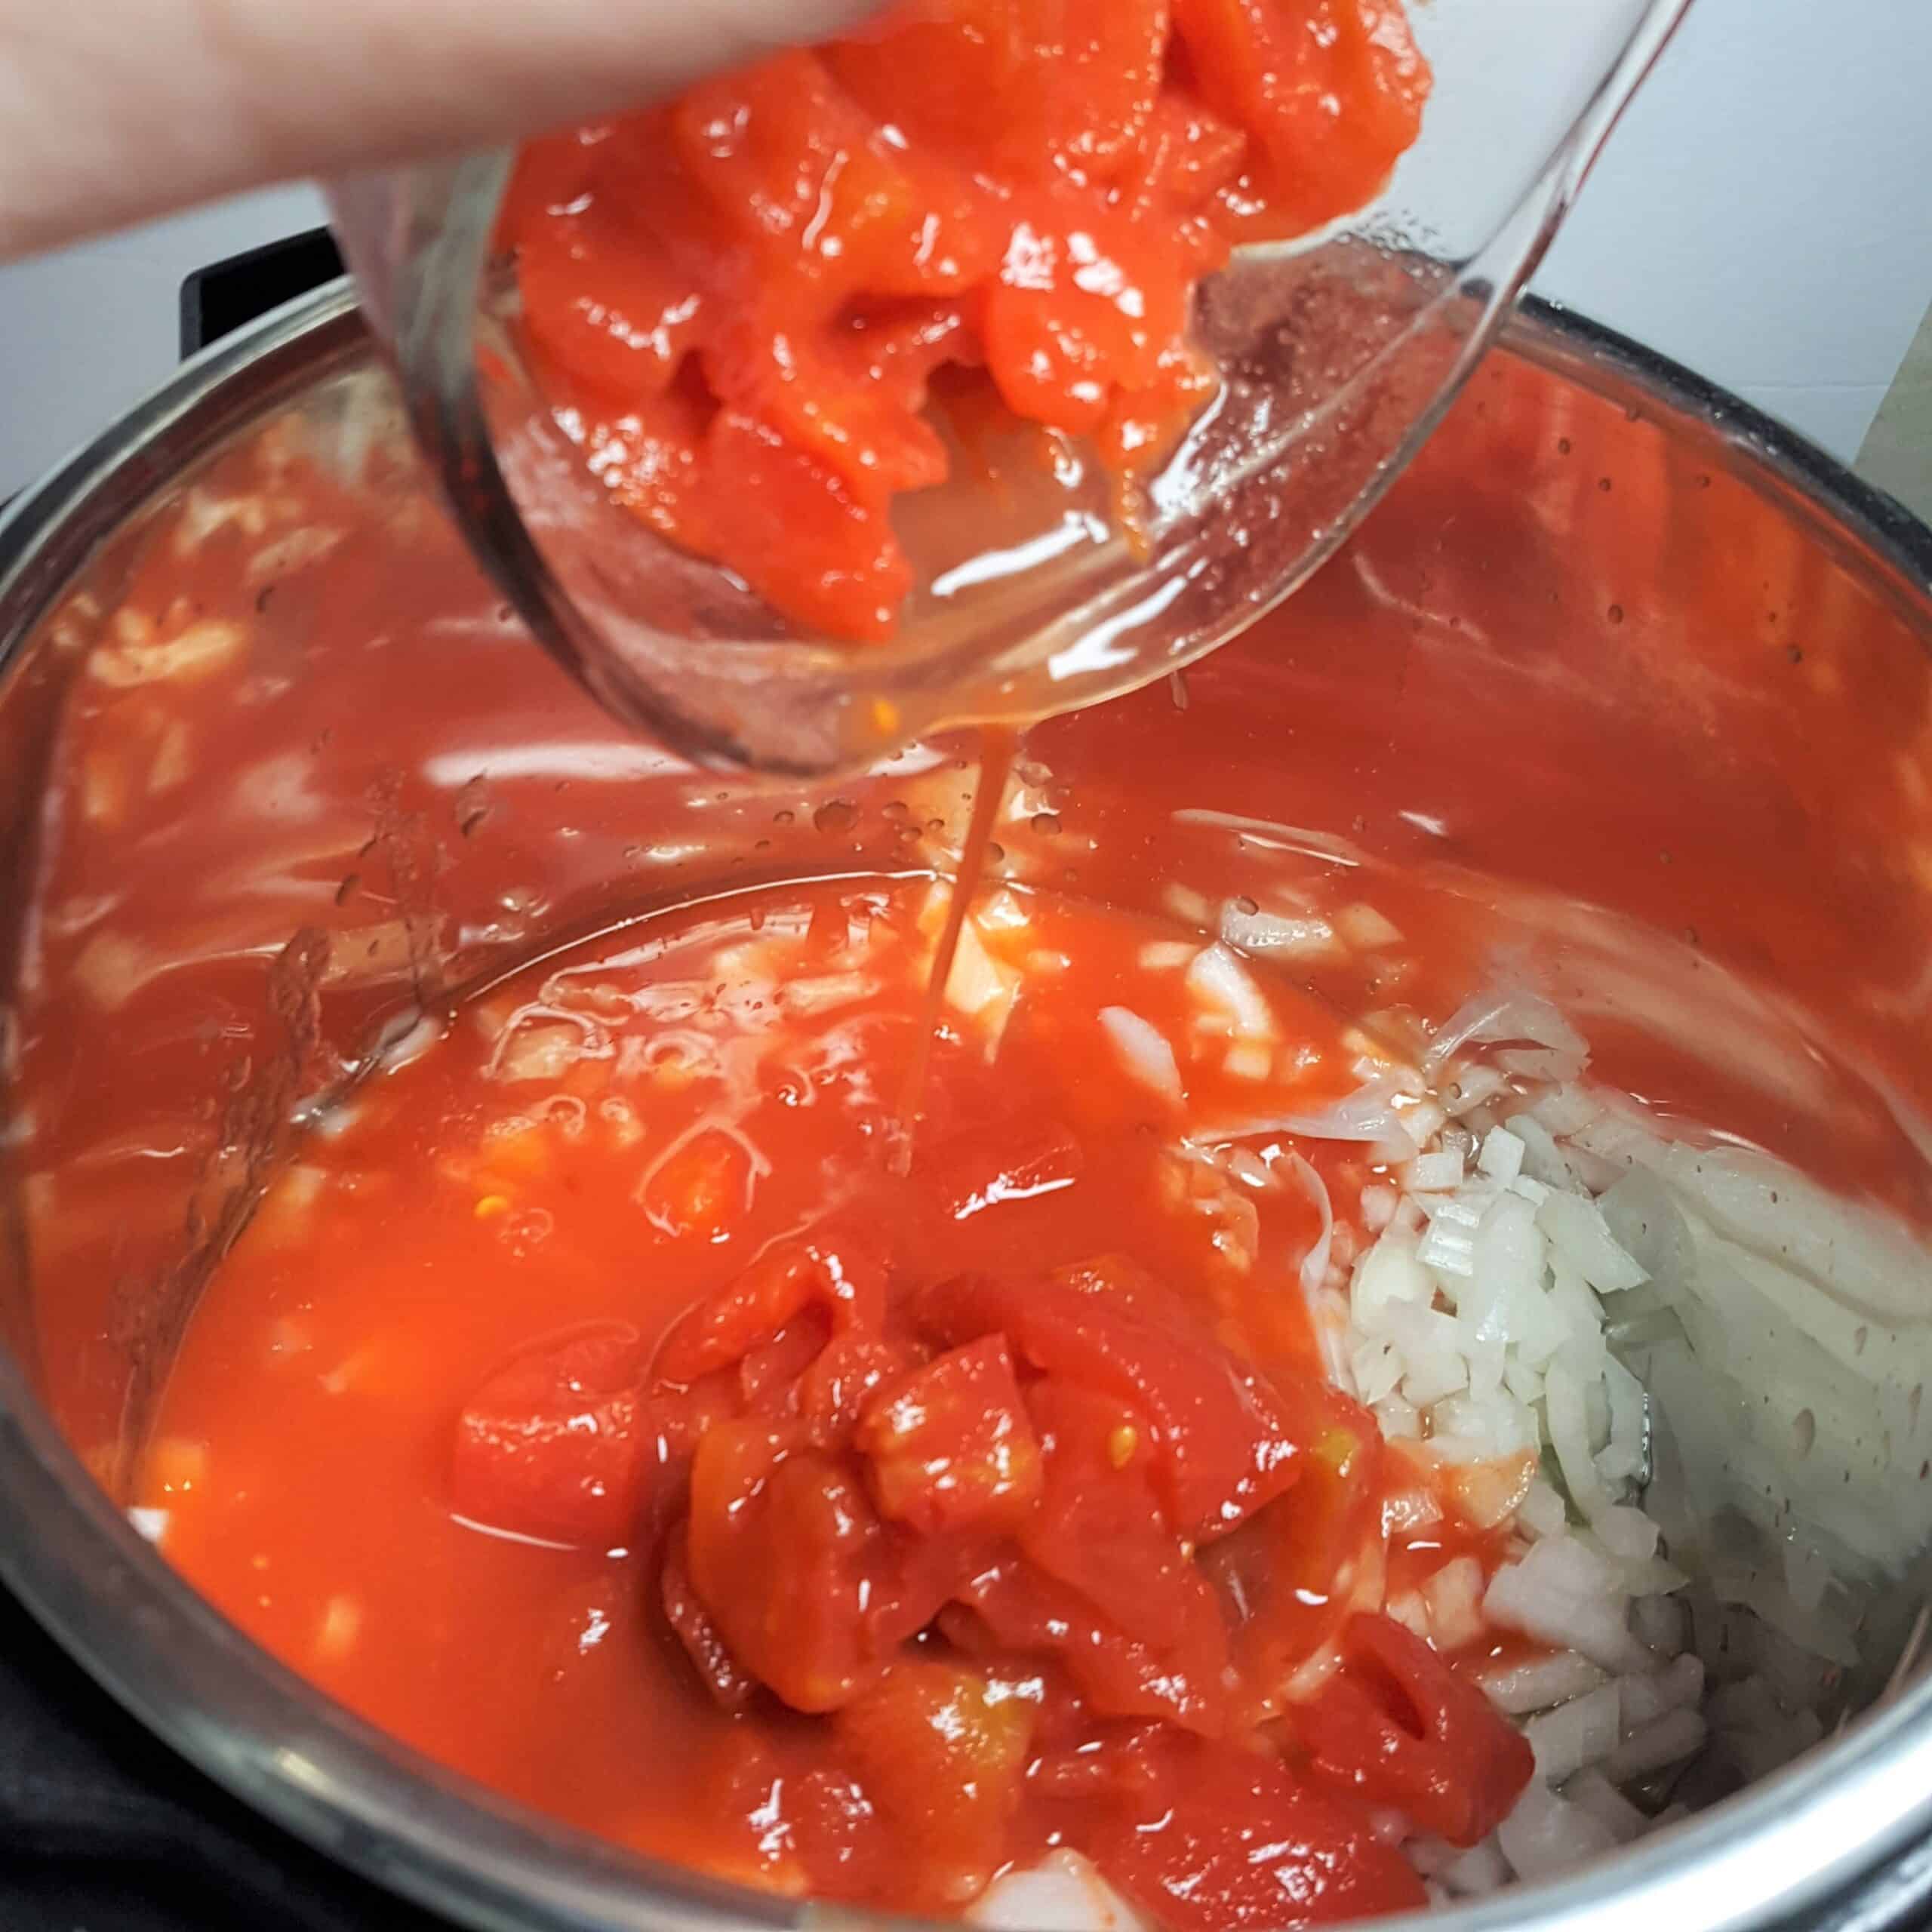 Pouring in Crushed Tomatoes